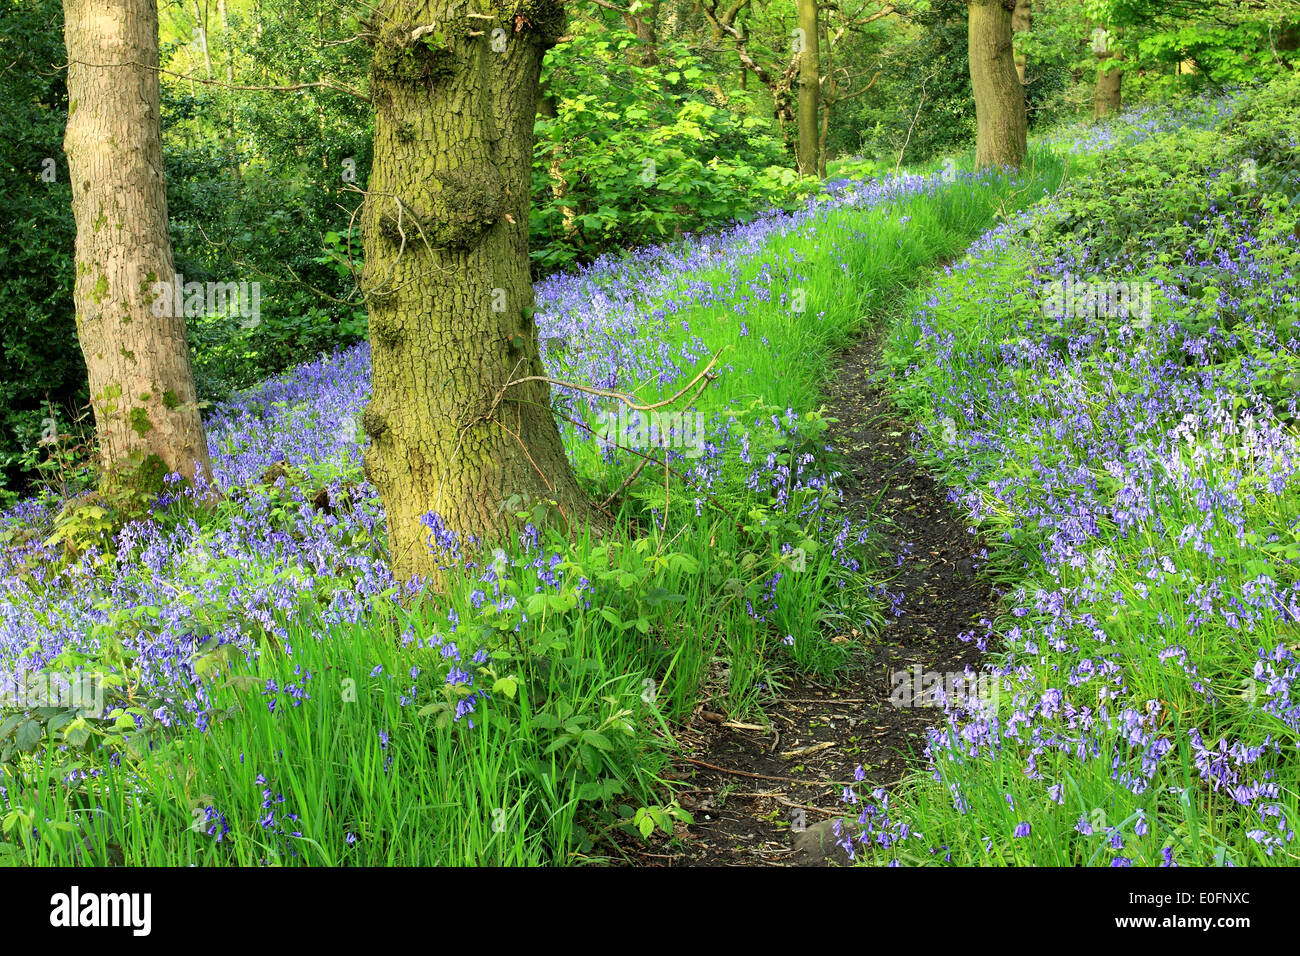 Springtime, and a path winds through bluebell woods at Old Spring Wood in Shipley, West Yorkshire, England Stock Photo